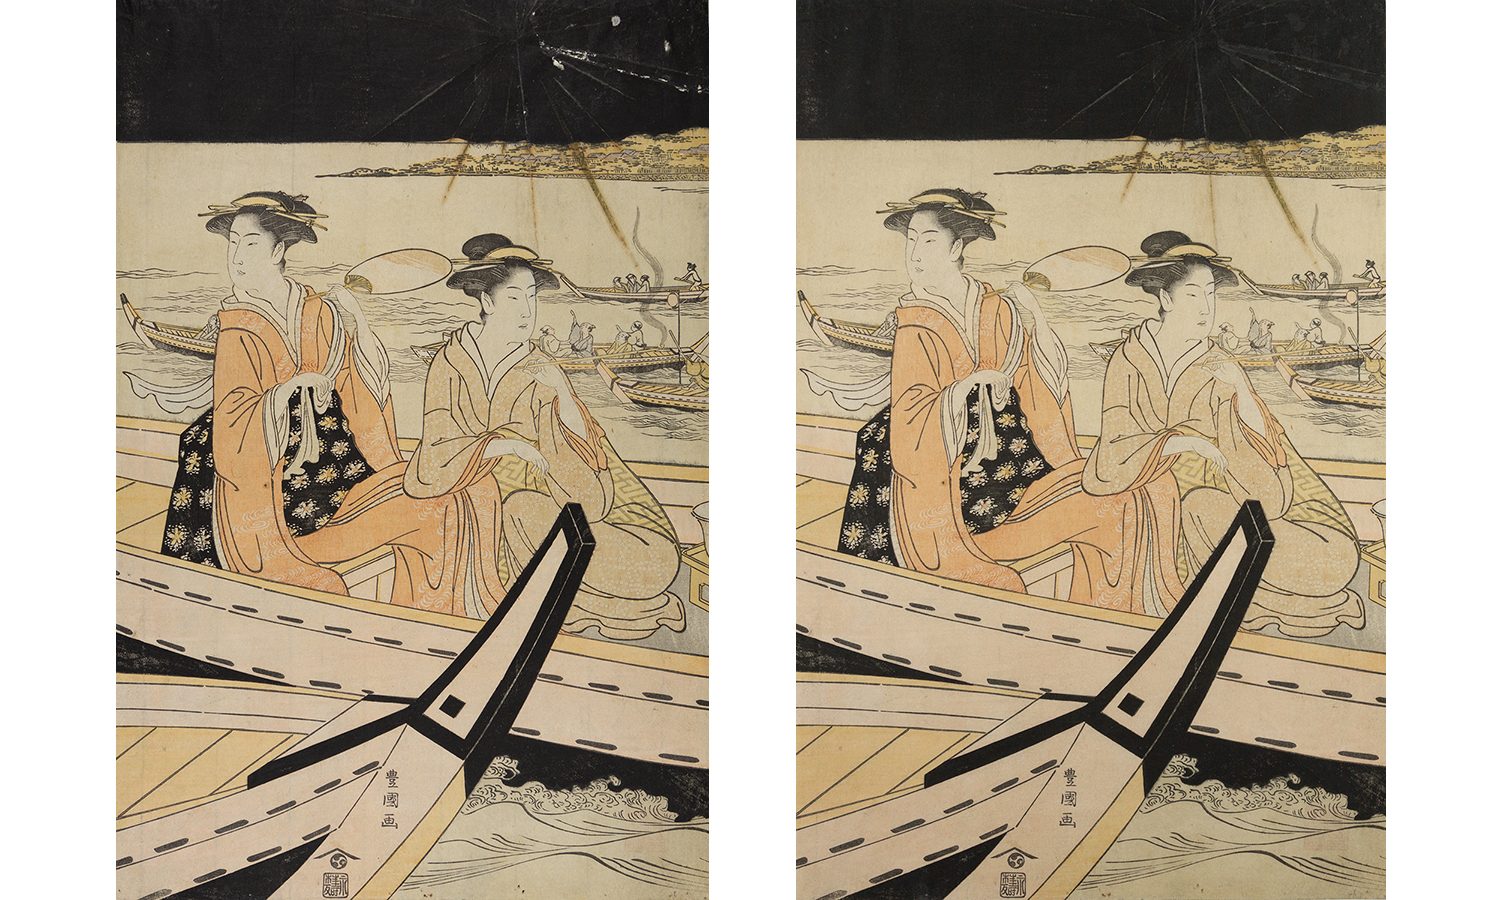 Side by side view of before and after conservation treatment of, Utagawa Toyokuni, Japanese, Watching Fireworks from Boats, ca. 1800, woodblock print.